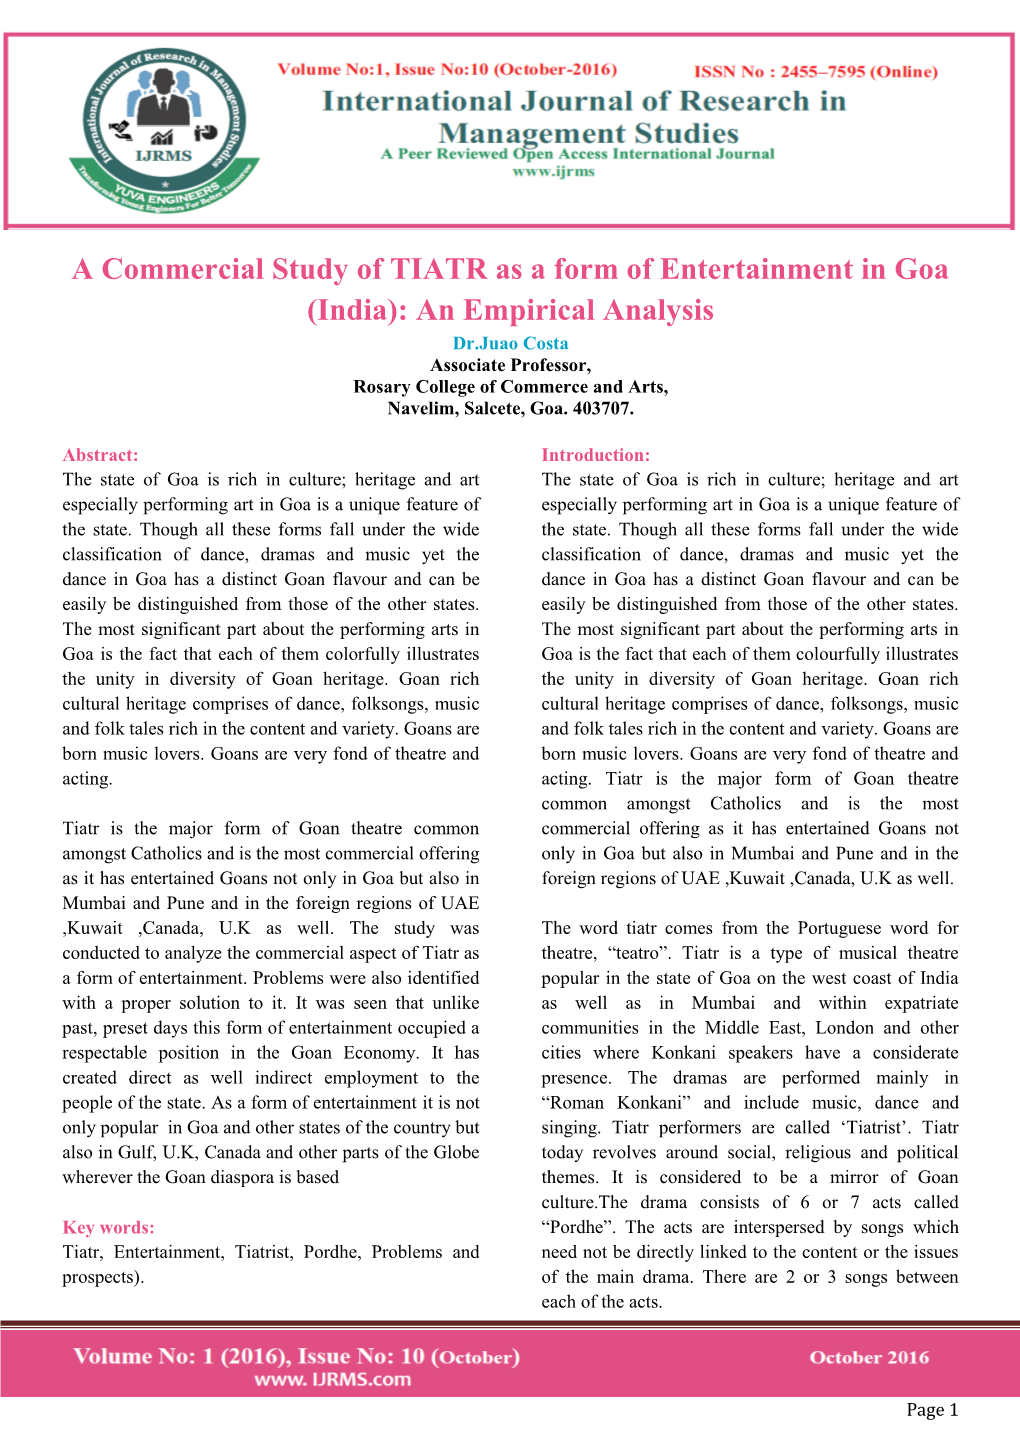 A Commercial Study of TIATR As a Form of Entertainment in Goa (India